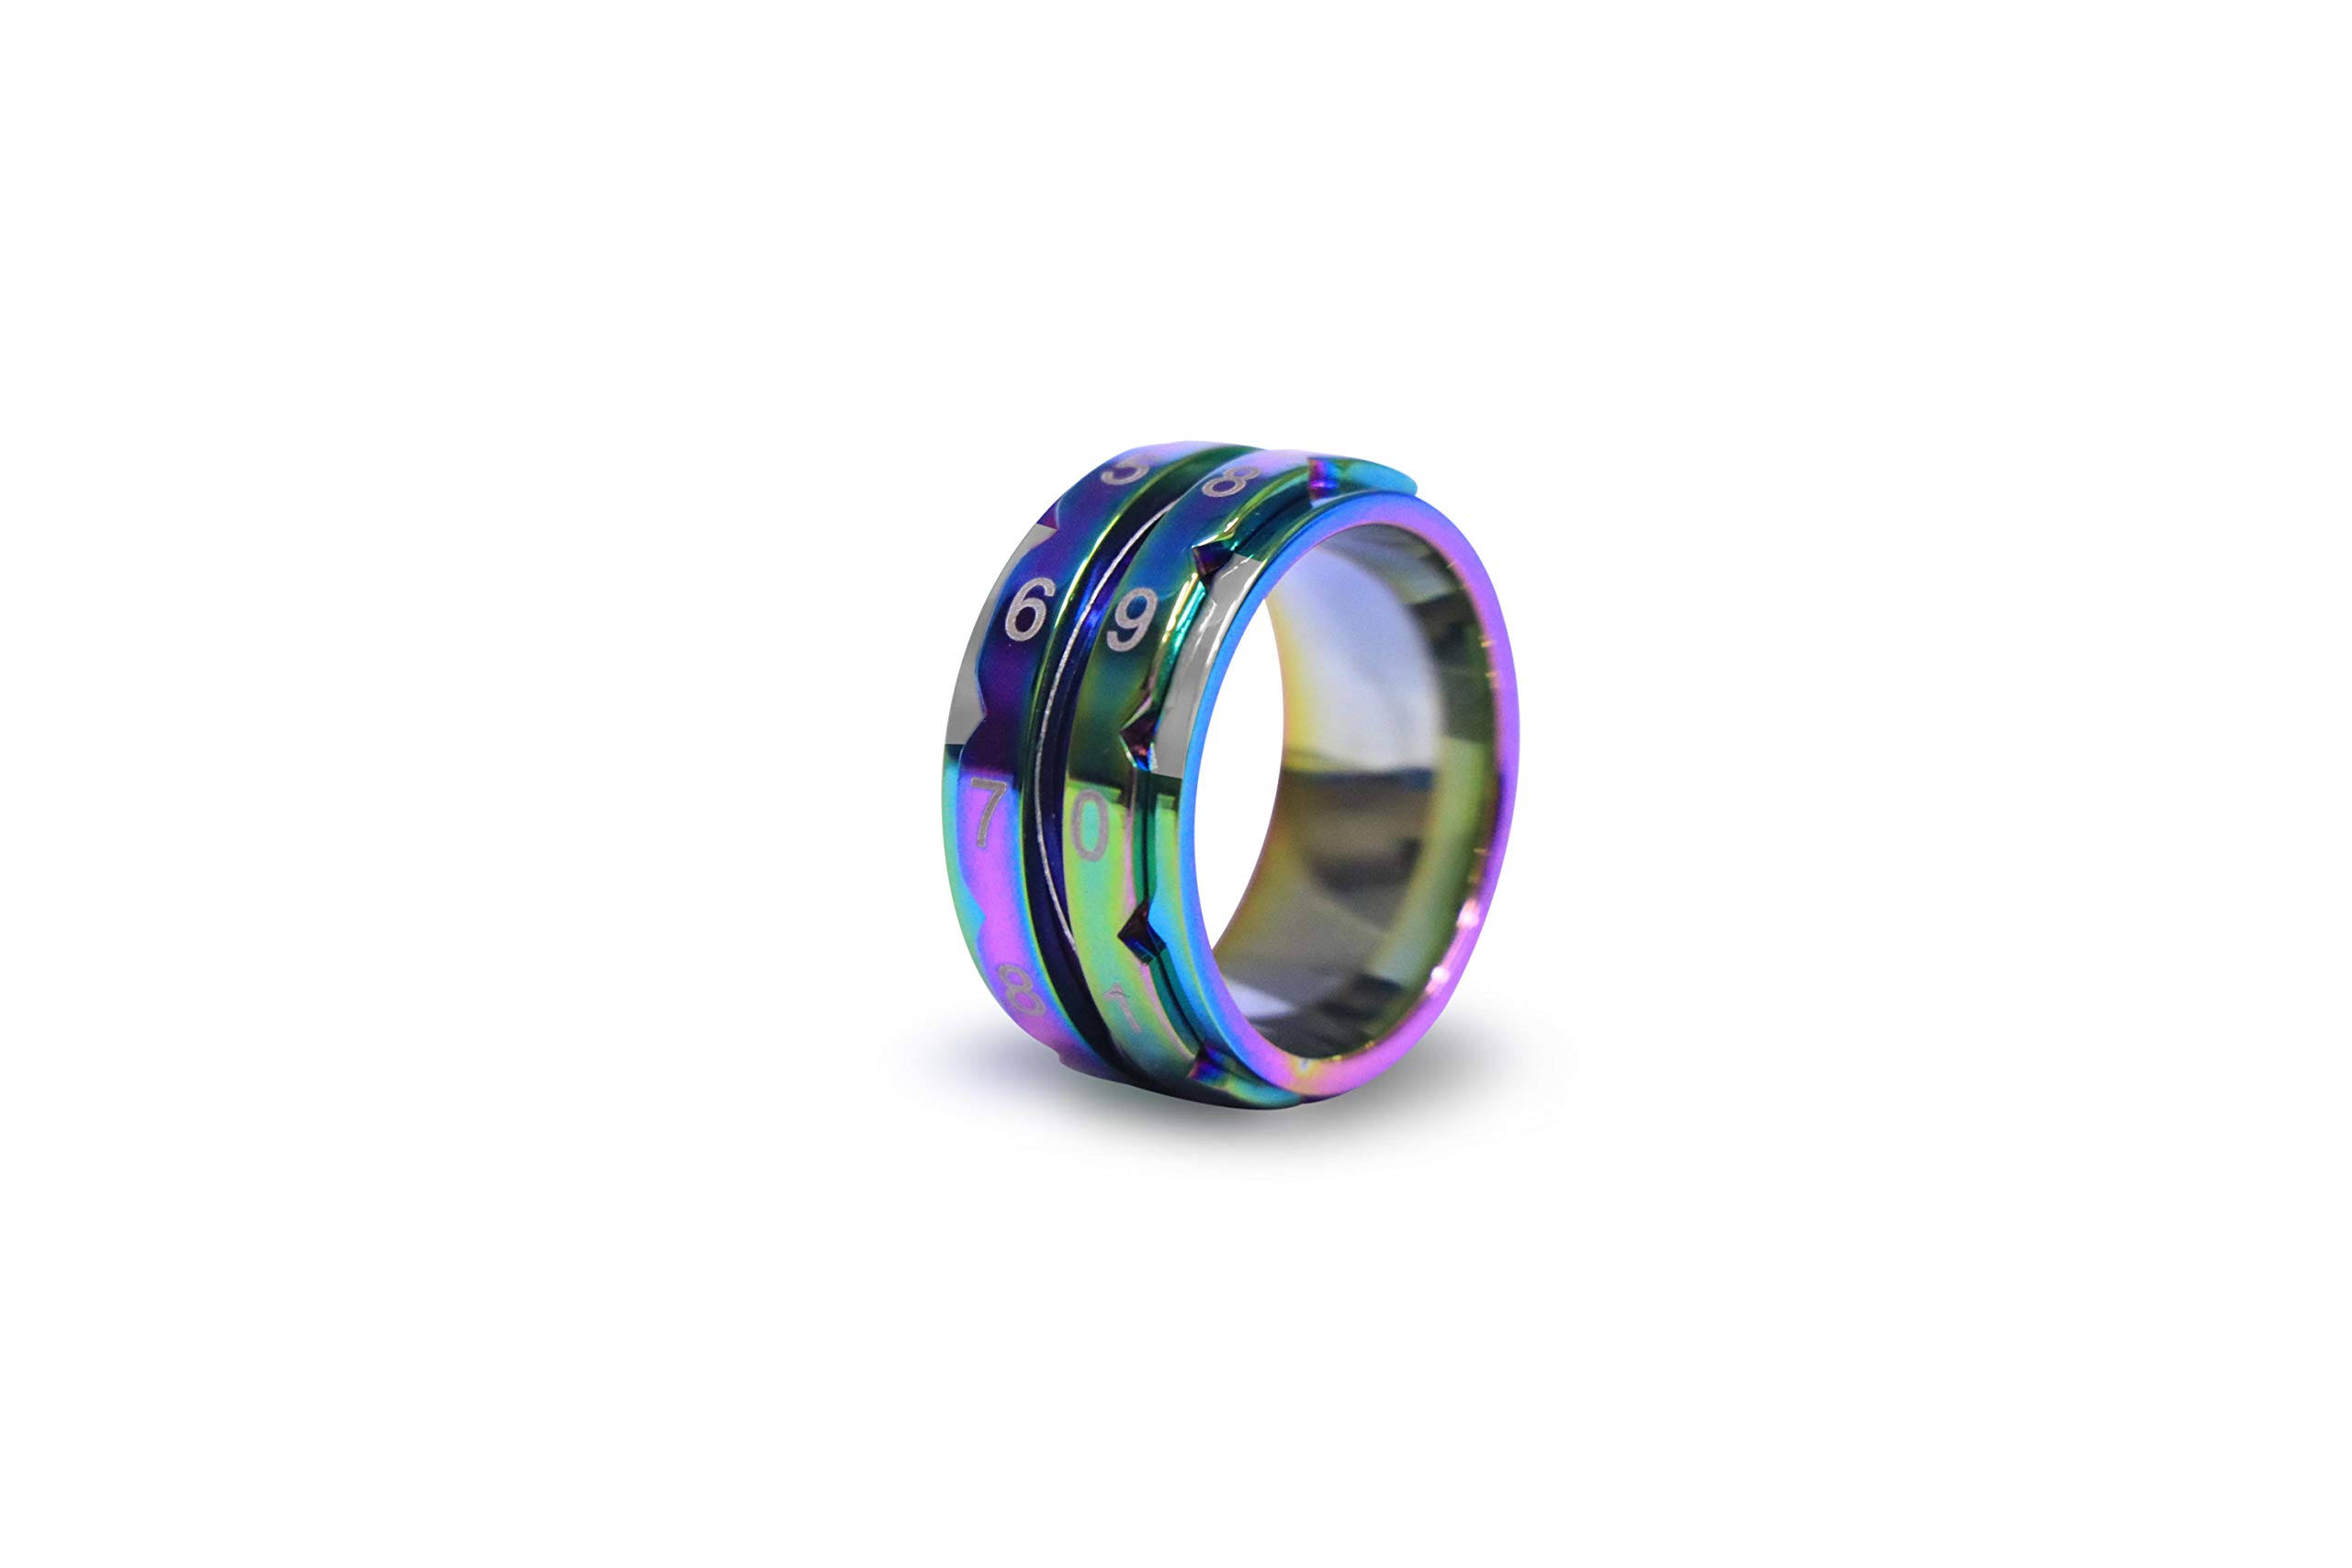 Knitter's Pride Rainbow Row Counter Ring-Size 9: 19.0mm Diameter